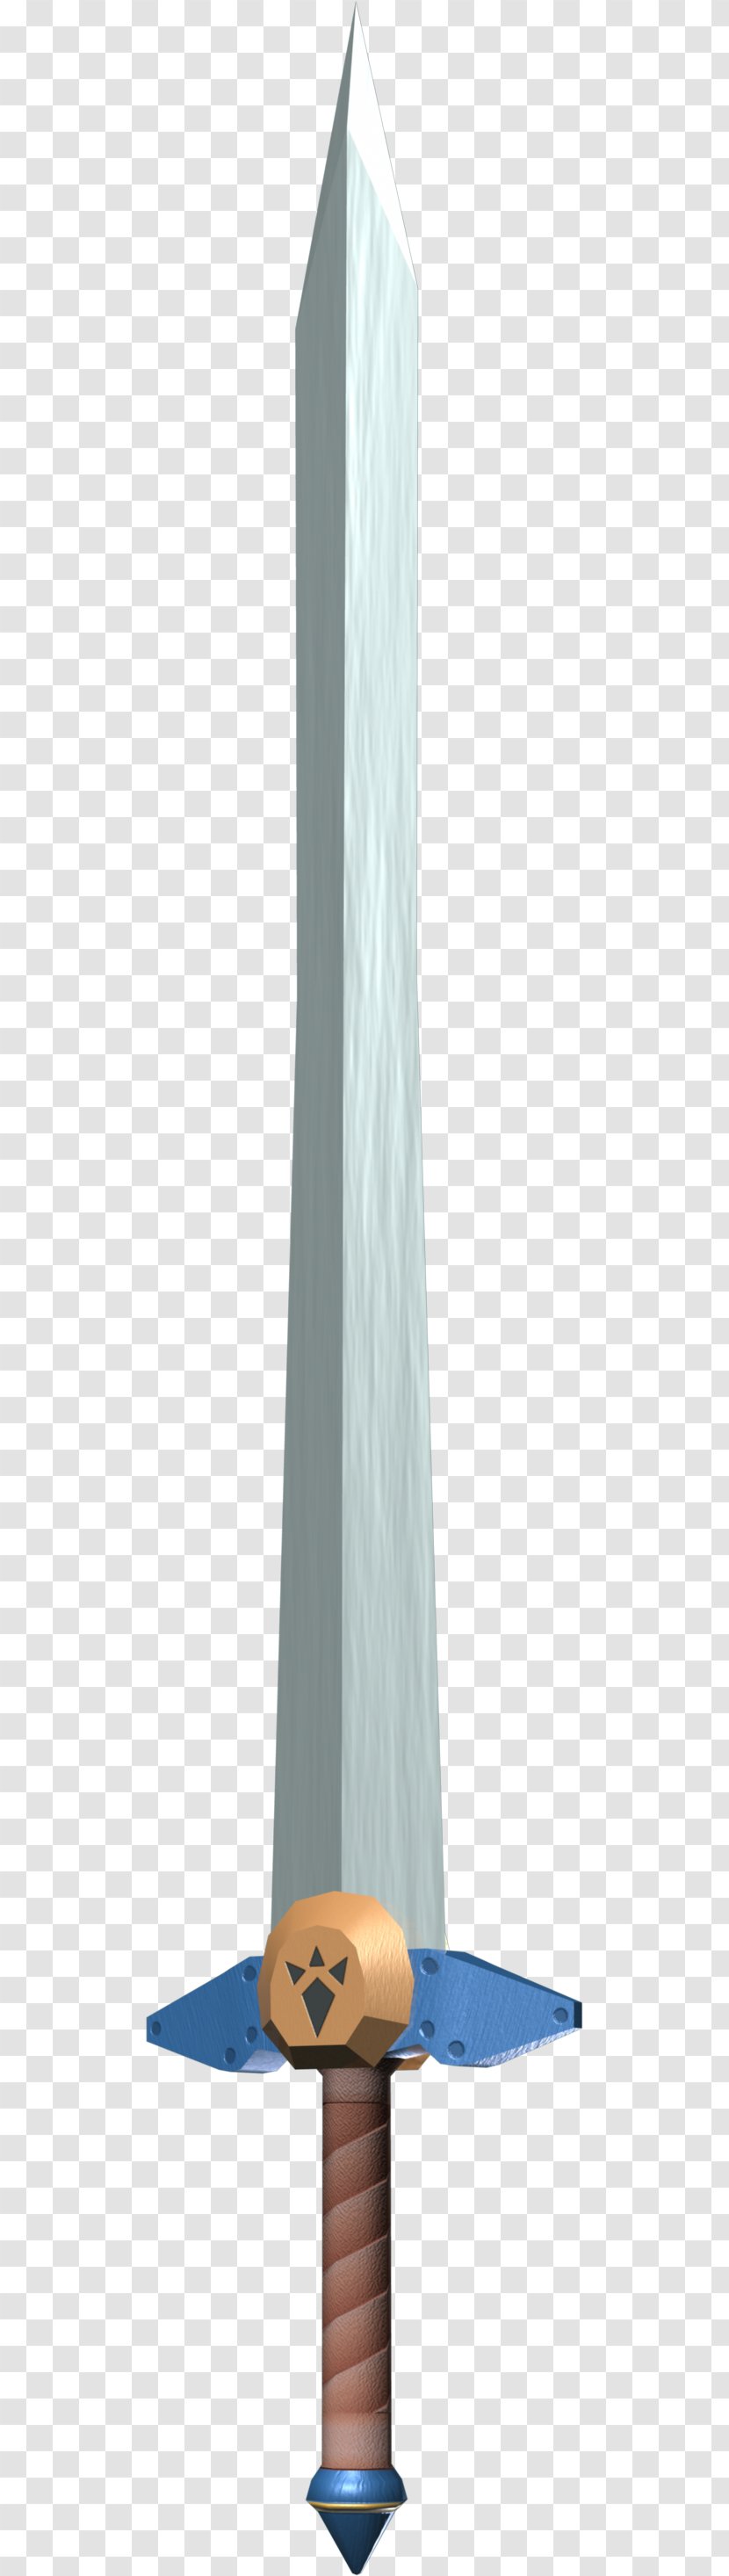 Sword Angle - Cold Weapon Transparent PNG